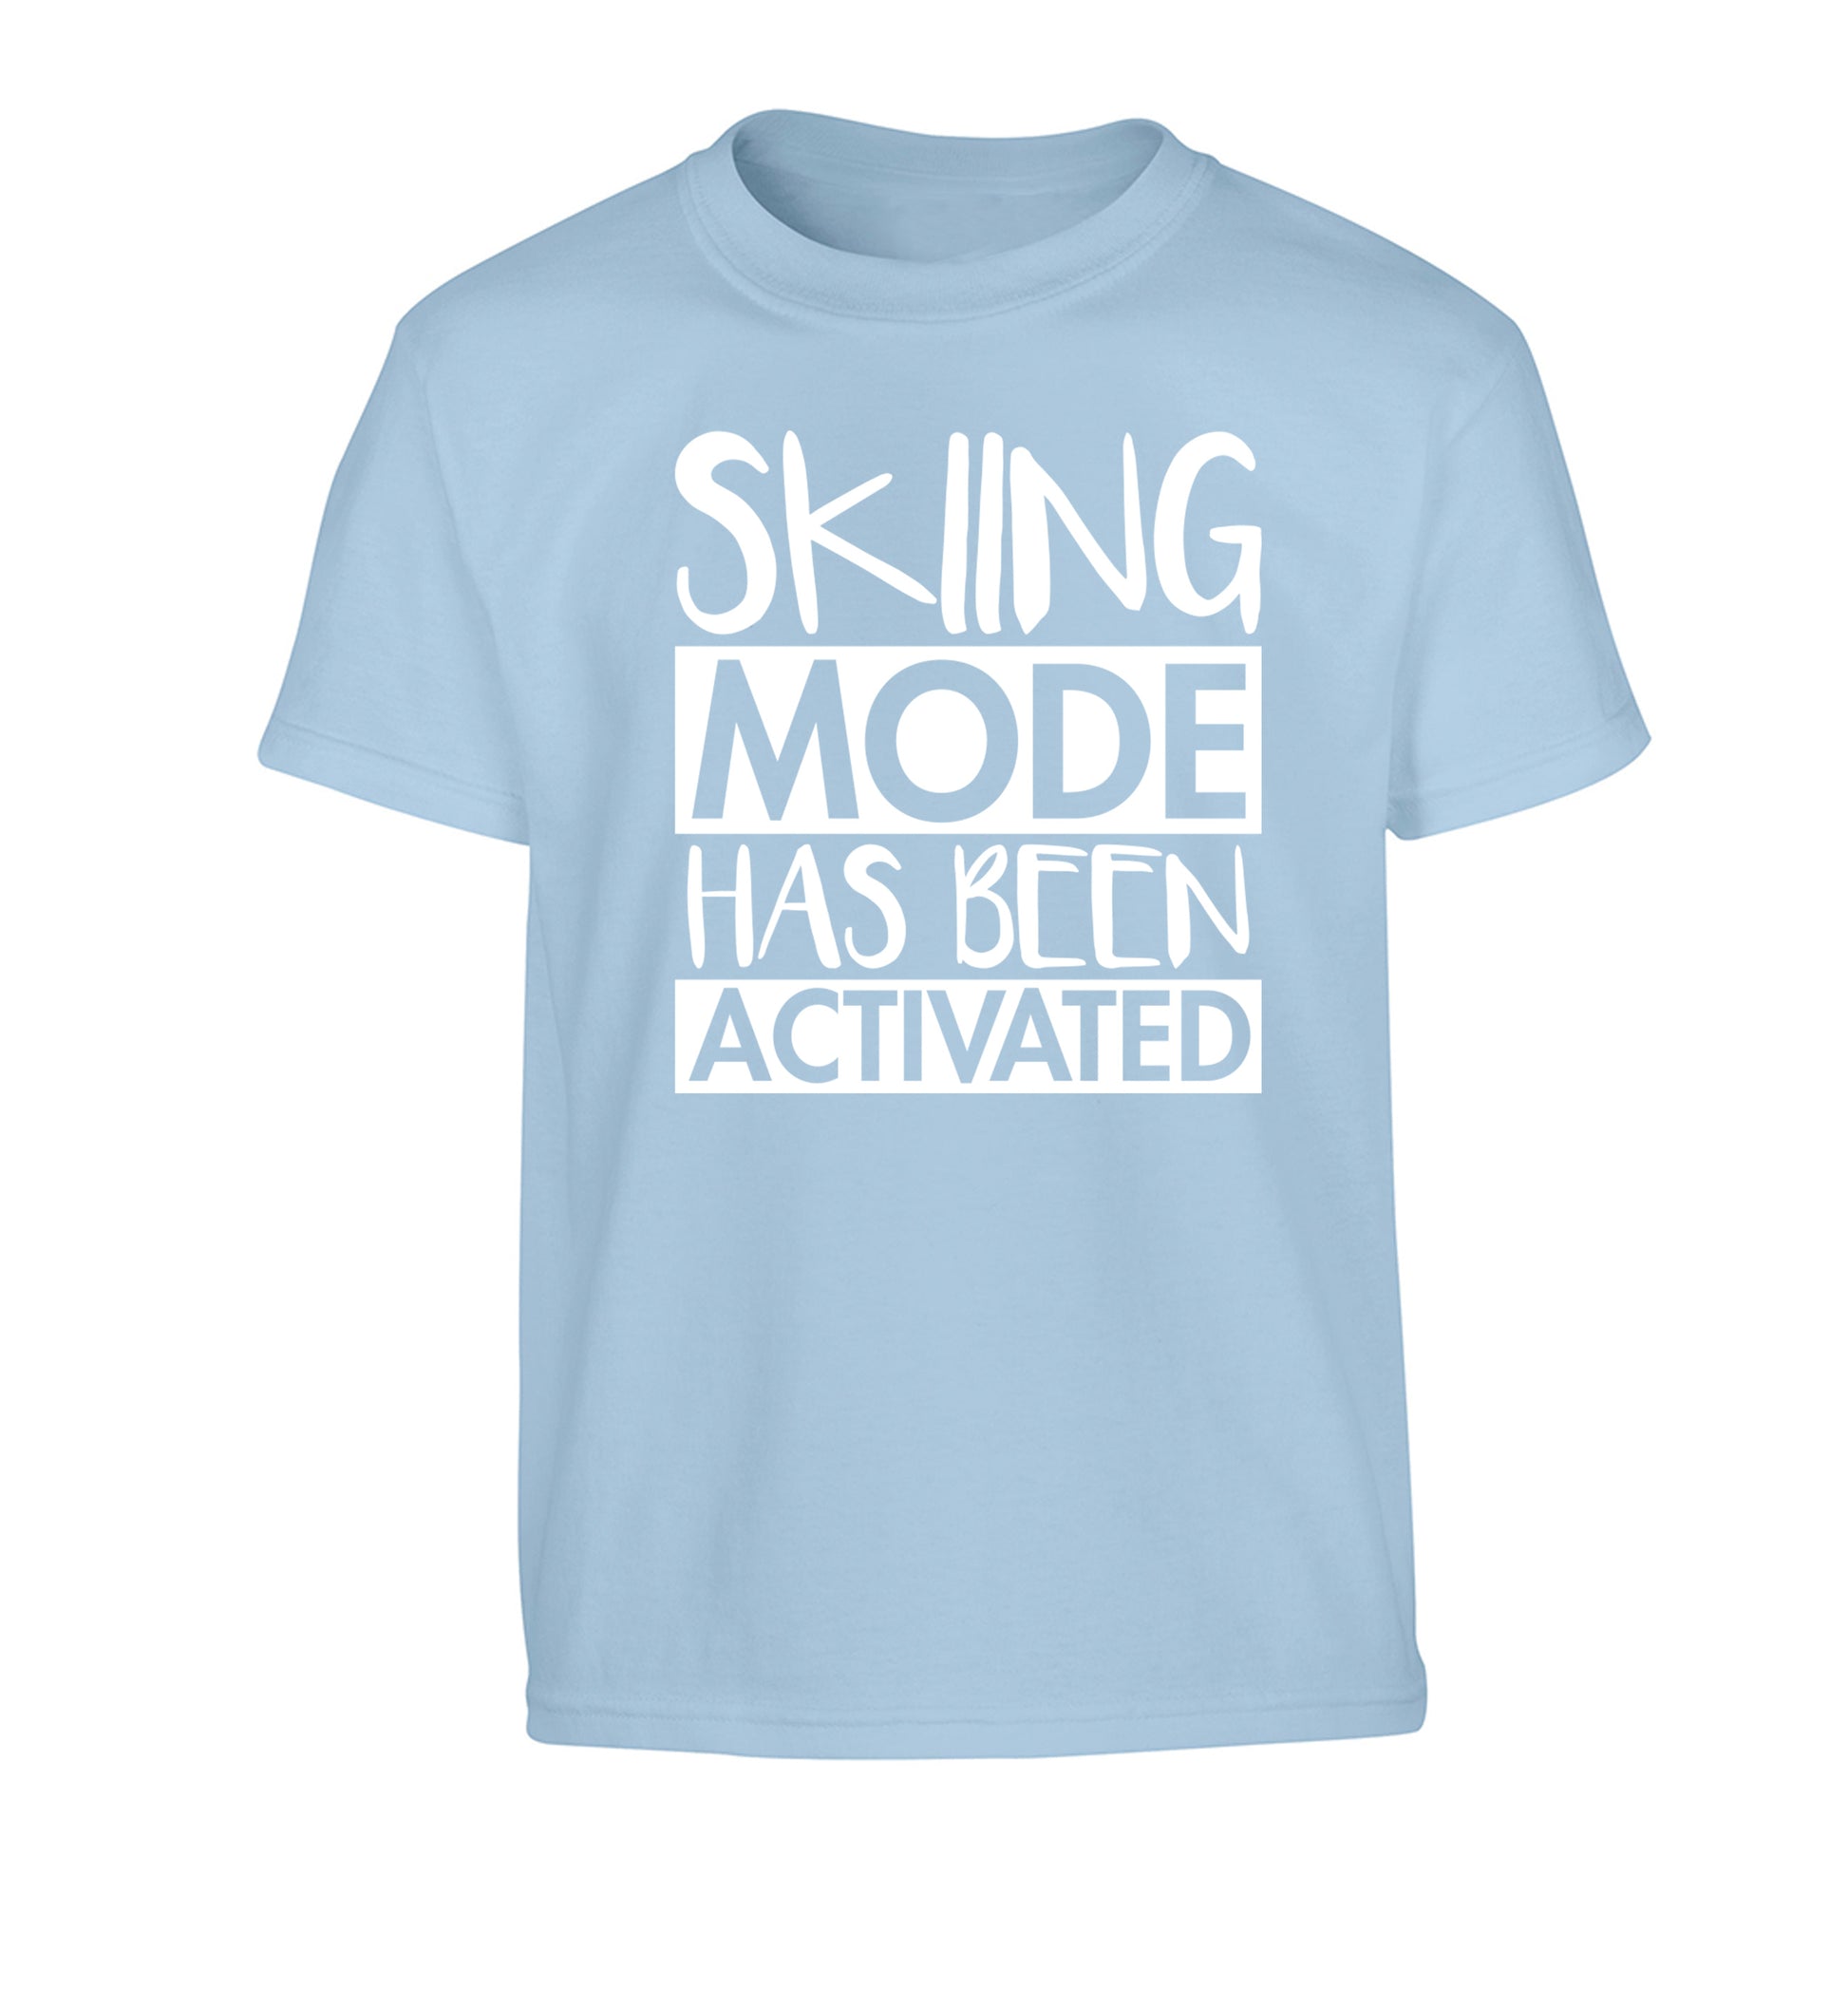 Skiing mode activated Children's light blue Tshirt 12-14 Years